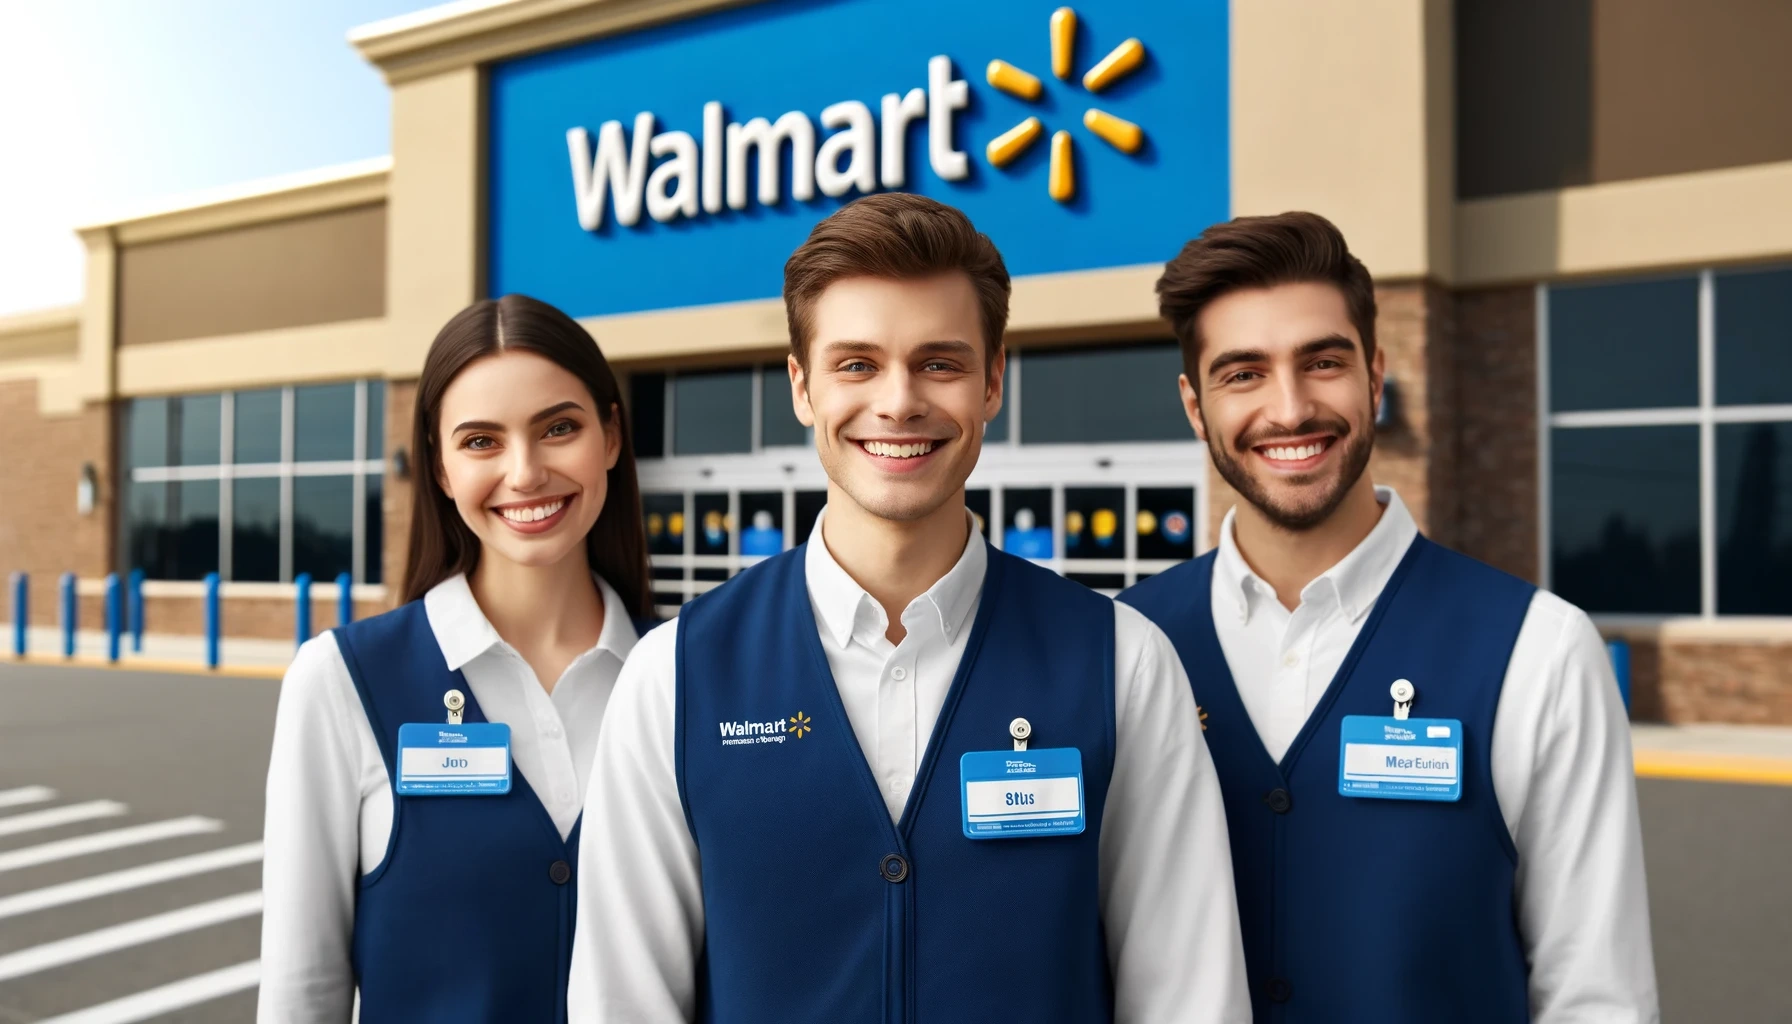 Walmart - Discover How to Apply For Jobs